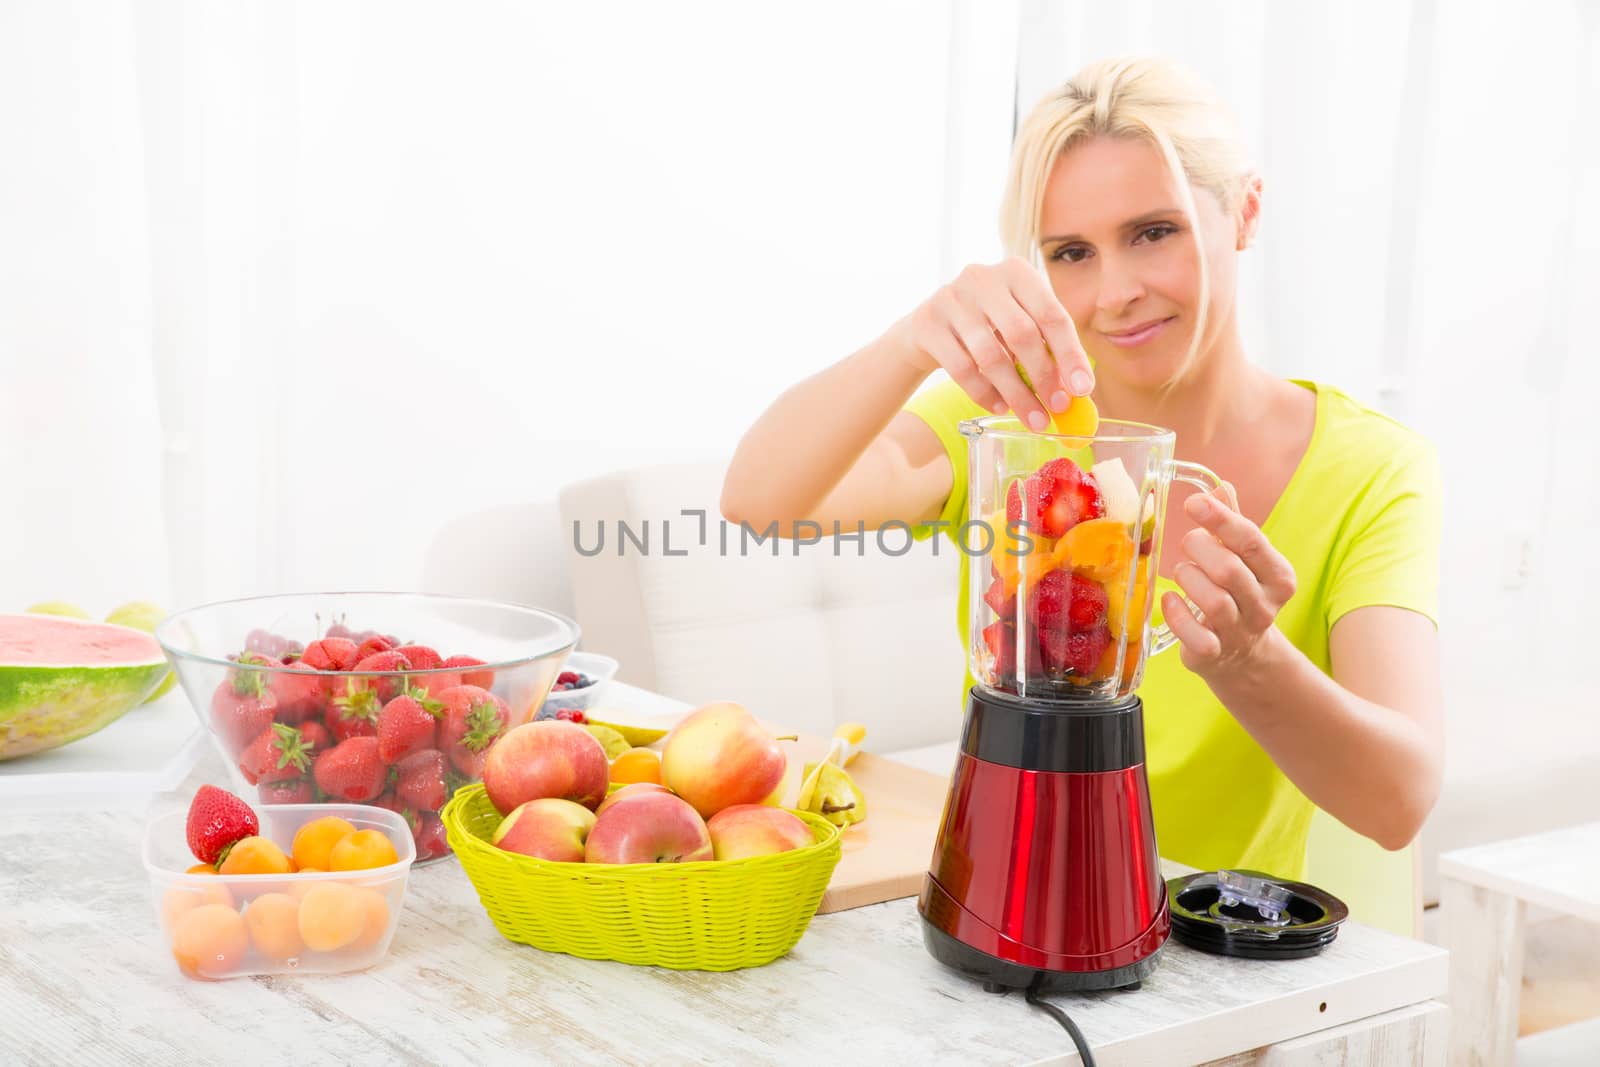 Mature woman blending a smoothie					 by Spectral